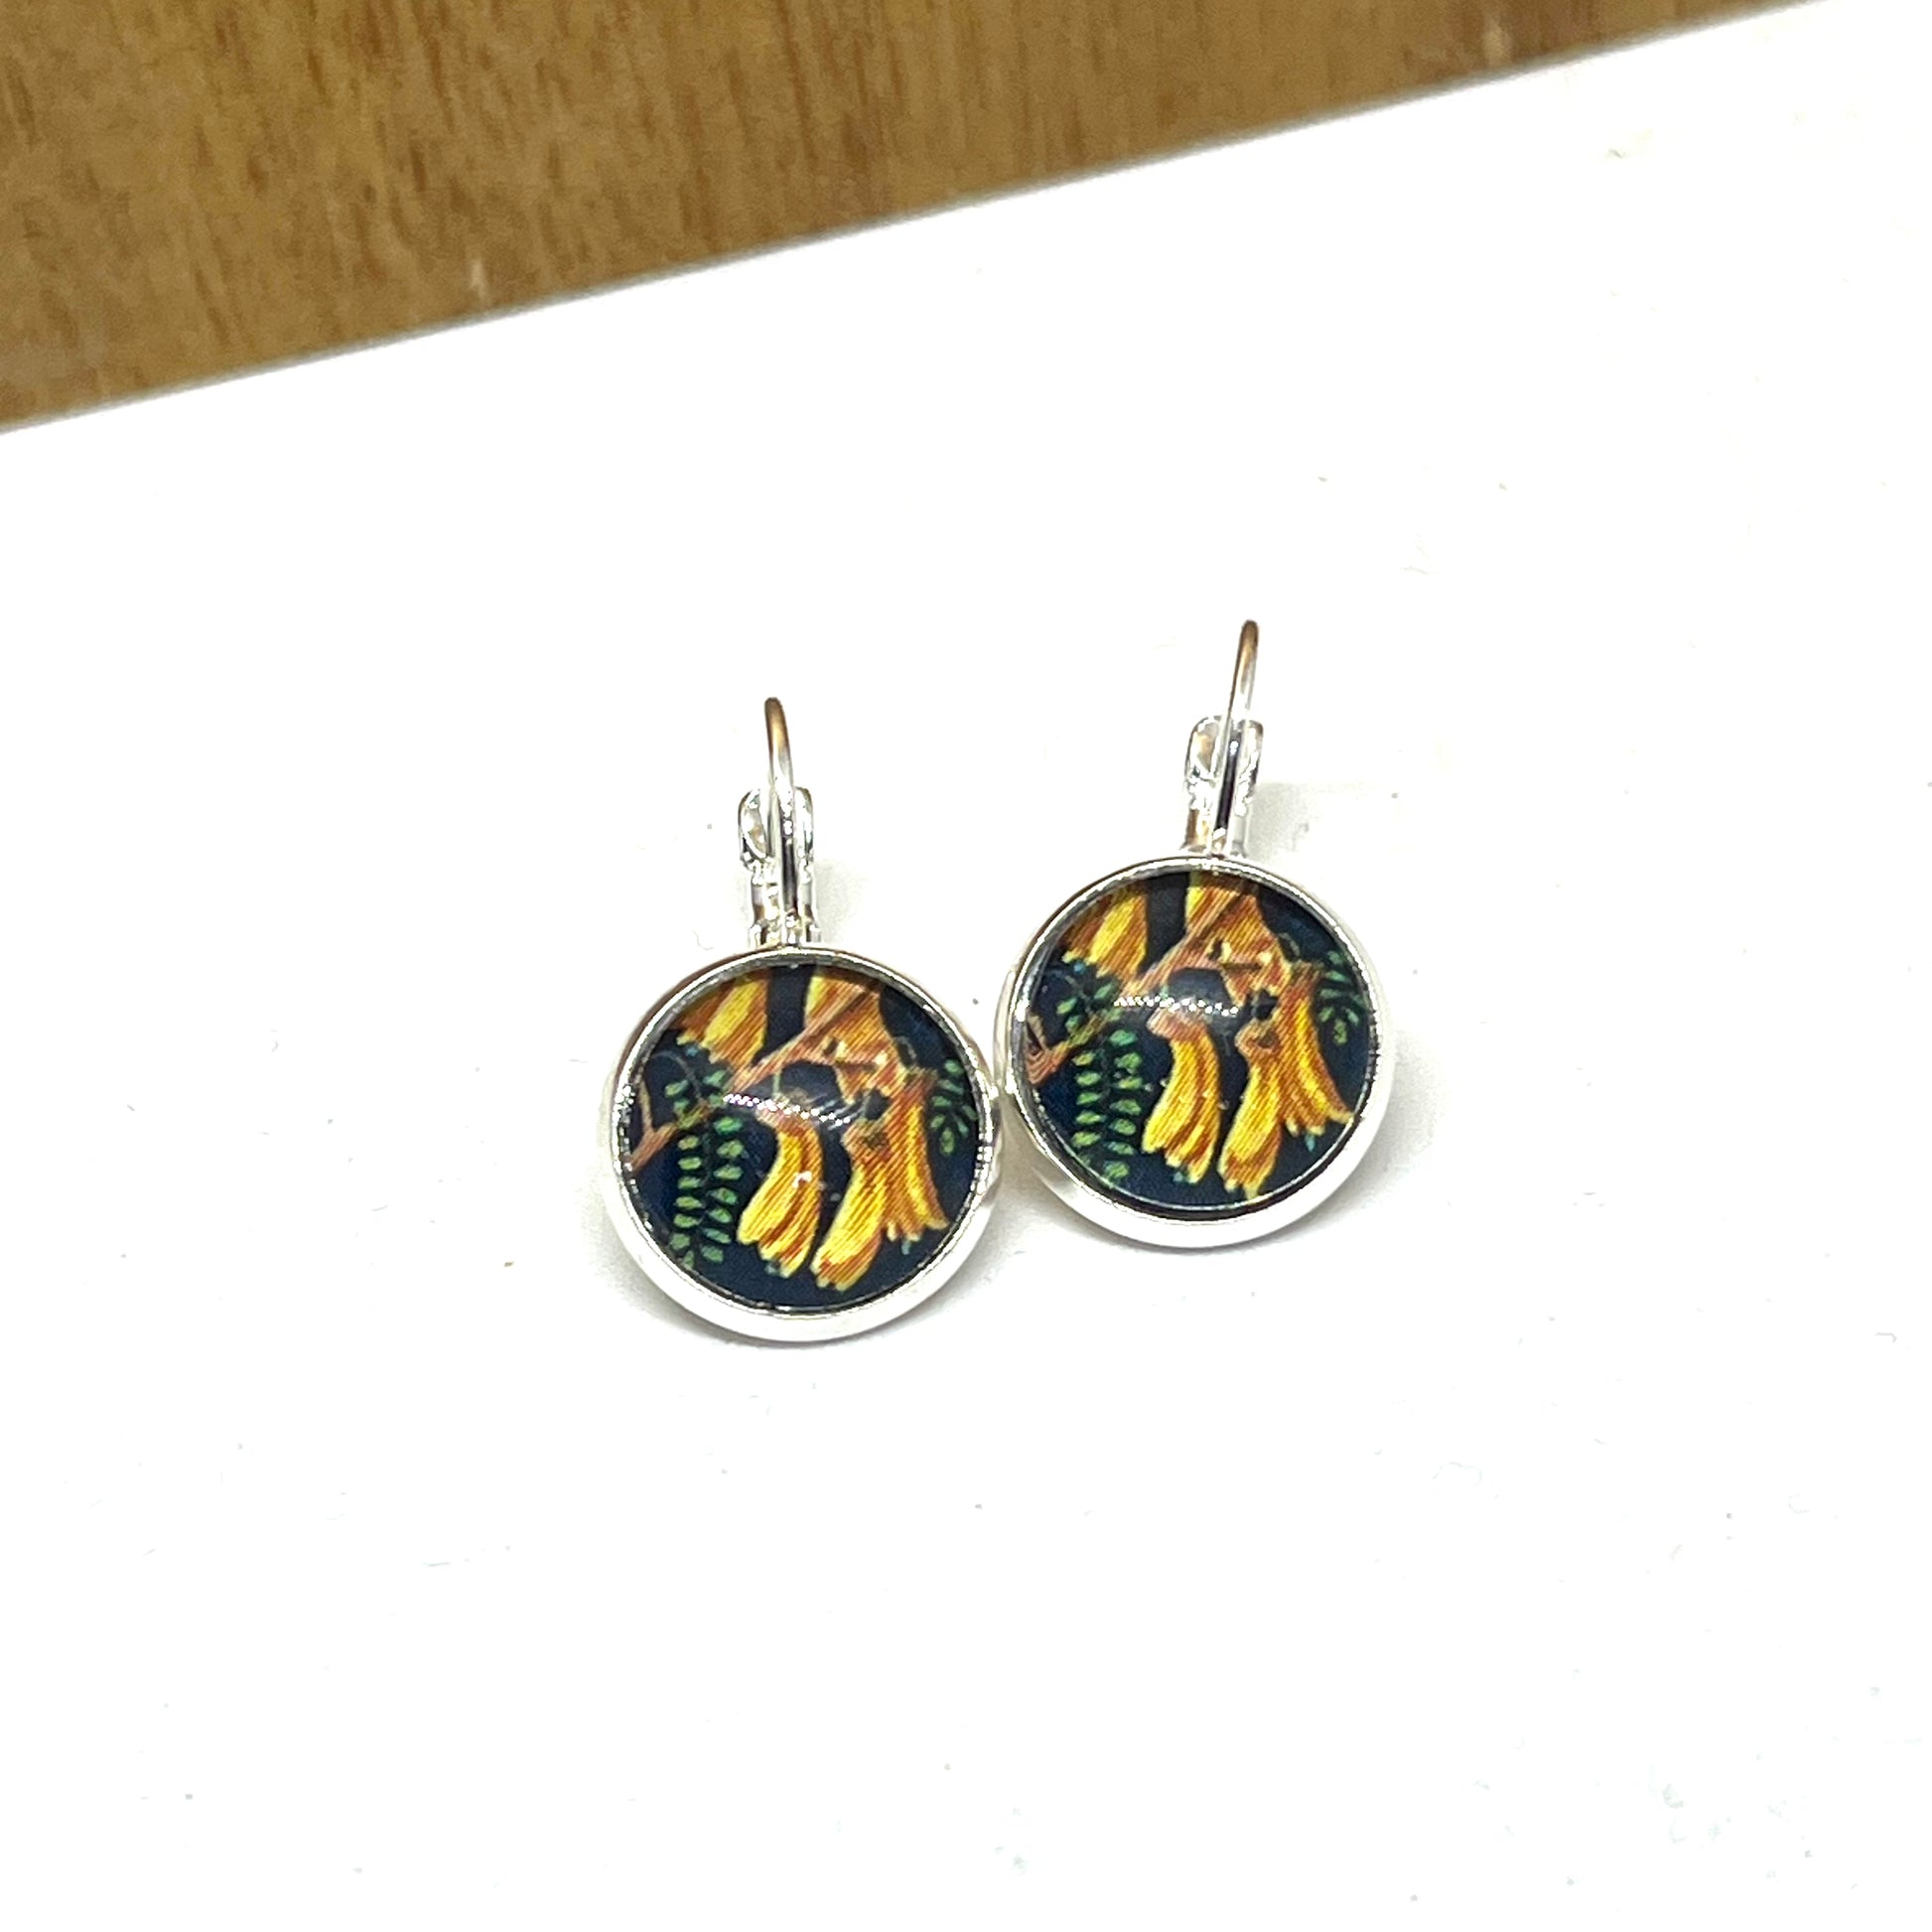 Kowhai glass dome earrings on french clasps. New zealand postage stamp image